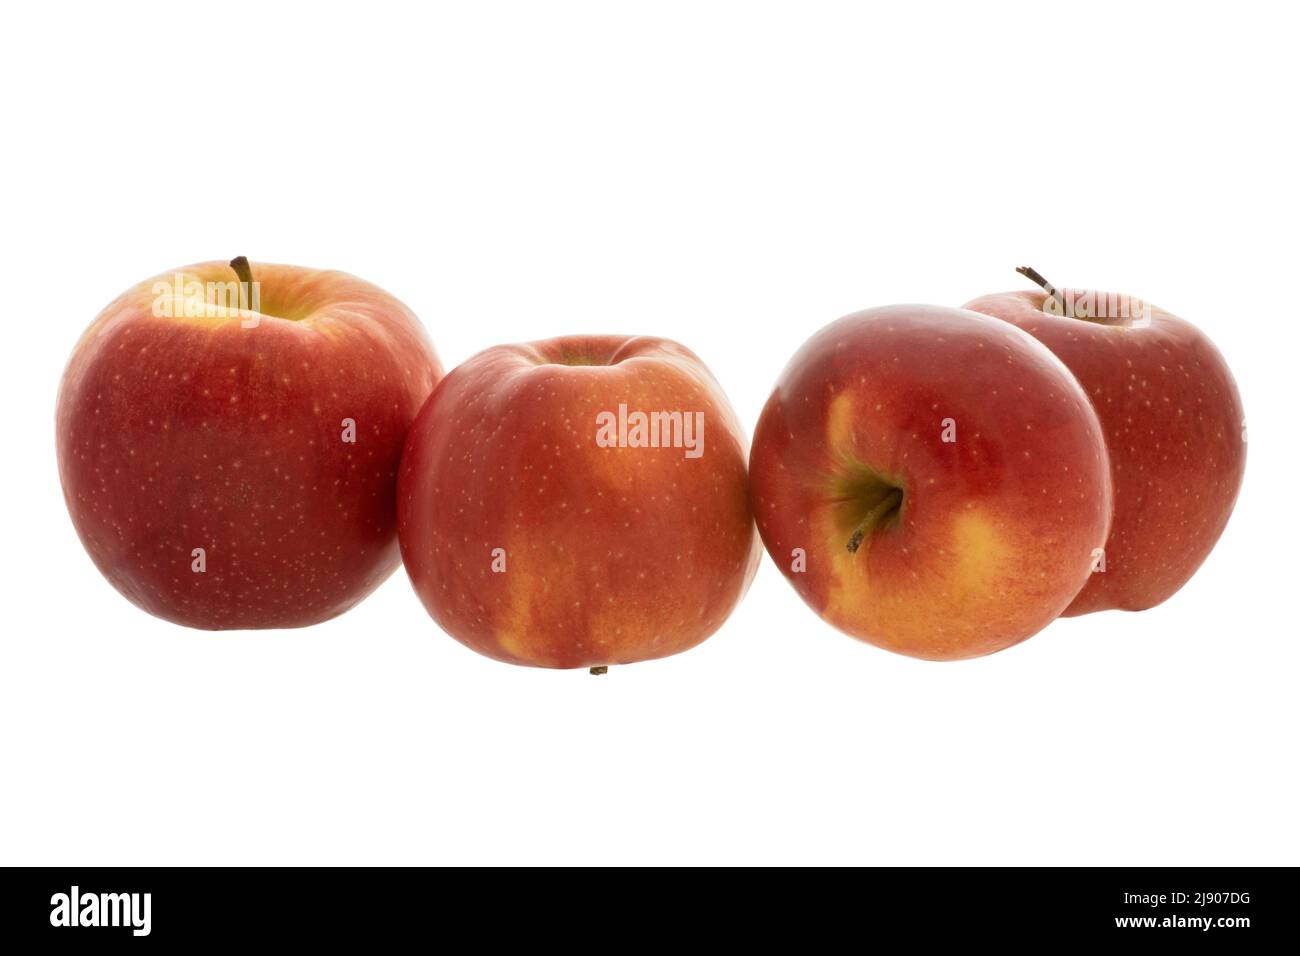 Fruit image four red ripe apples on white background Stock Photo